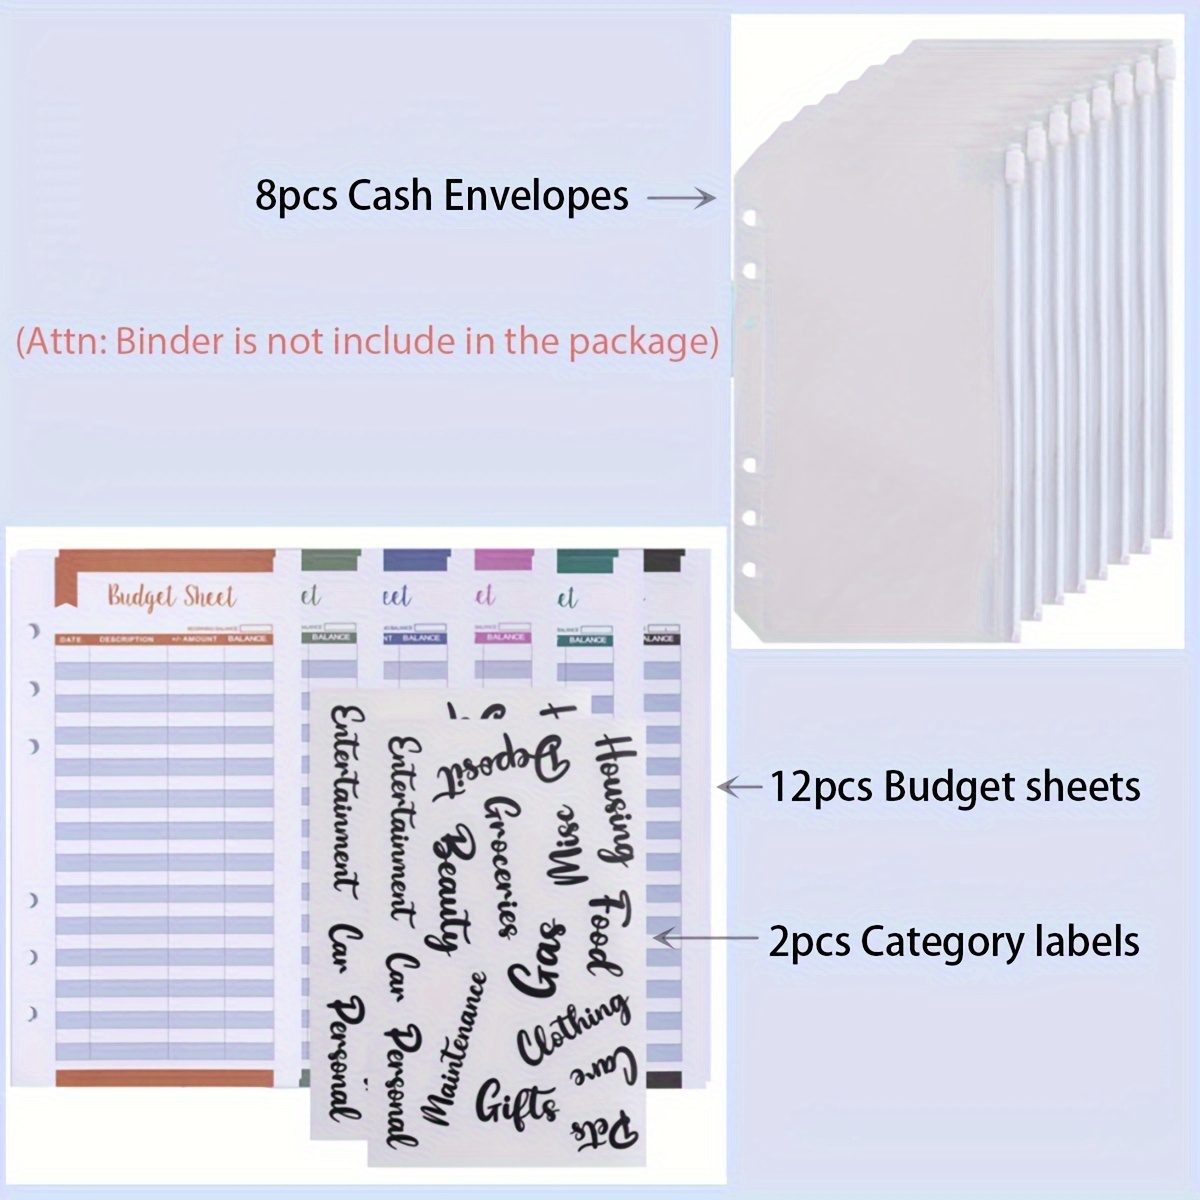 

8pcs A6 Size Waterproof Pvc Budget Cash Envelopes - 6 Holes Folders For 6-ring Budget Binder - Clear Zipper Loose Leaf Bags For Budgeting & Document Filing + 12pcs Budget Sheets + 2pcs Category Lables